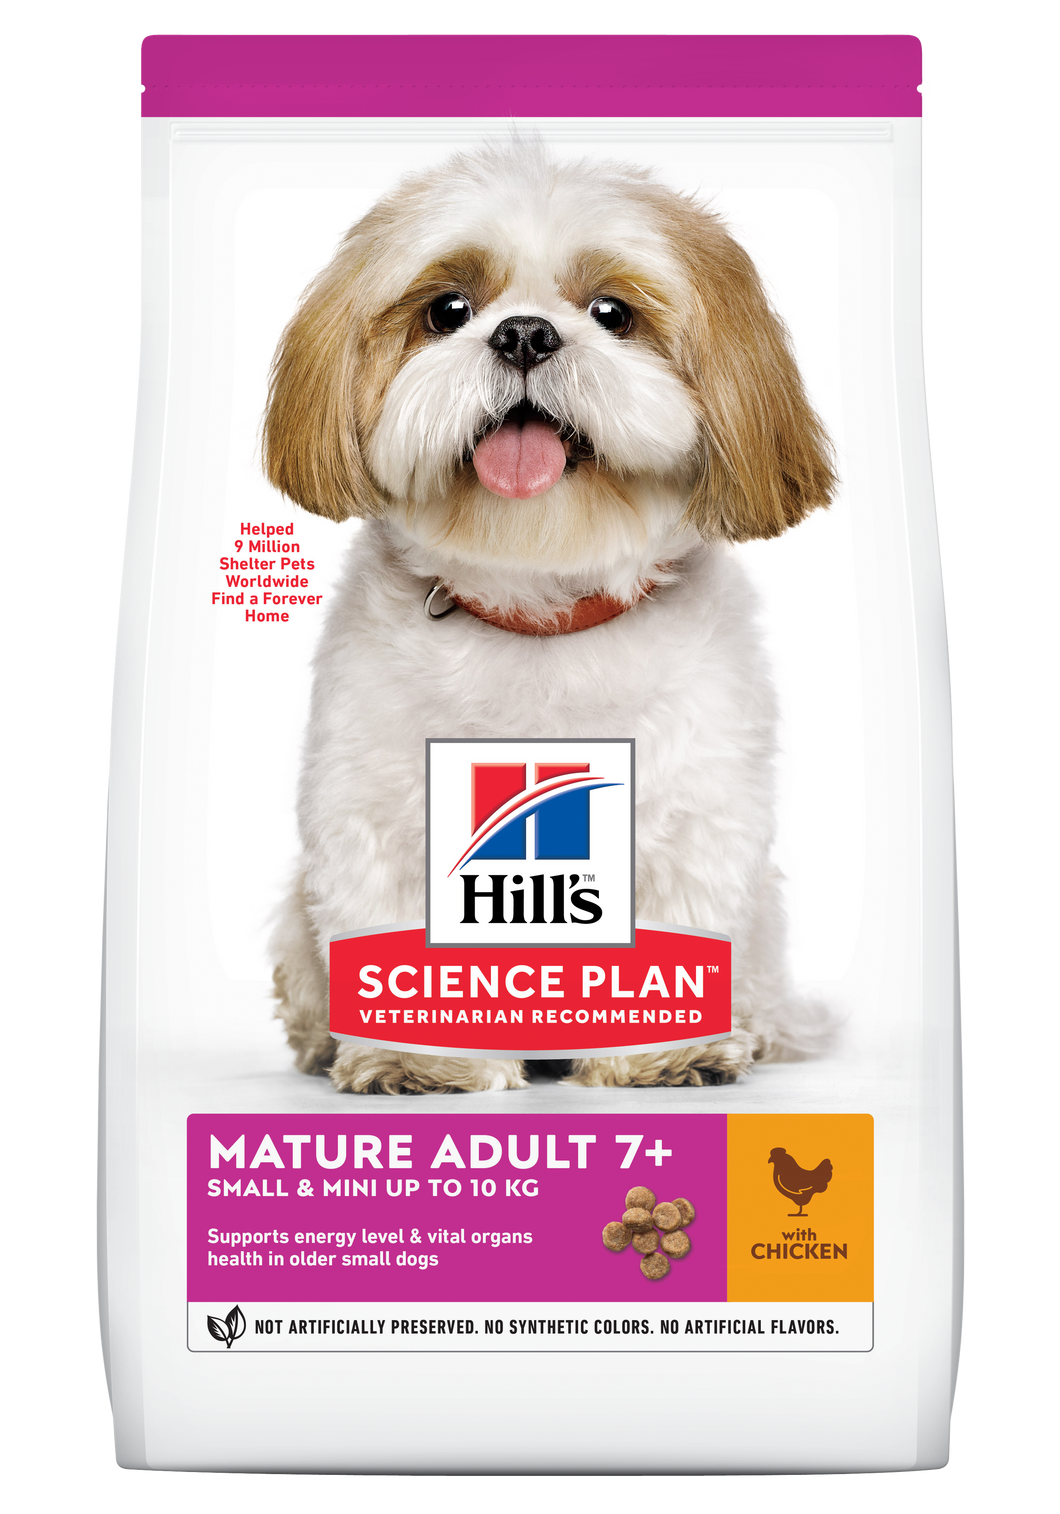 HILL'S SCIENCE PLAN Senior Vitality Small & Mini 7+ Dry Dog Food Chicken & Rice flavour